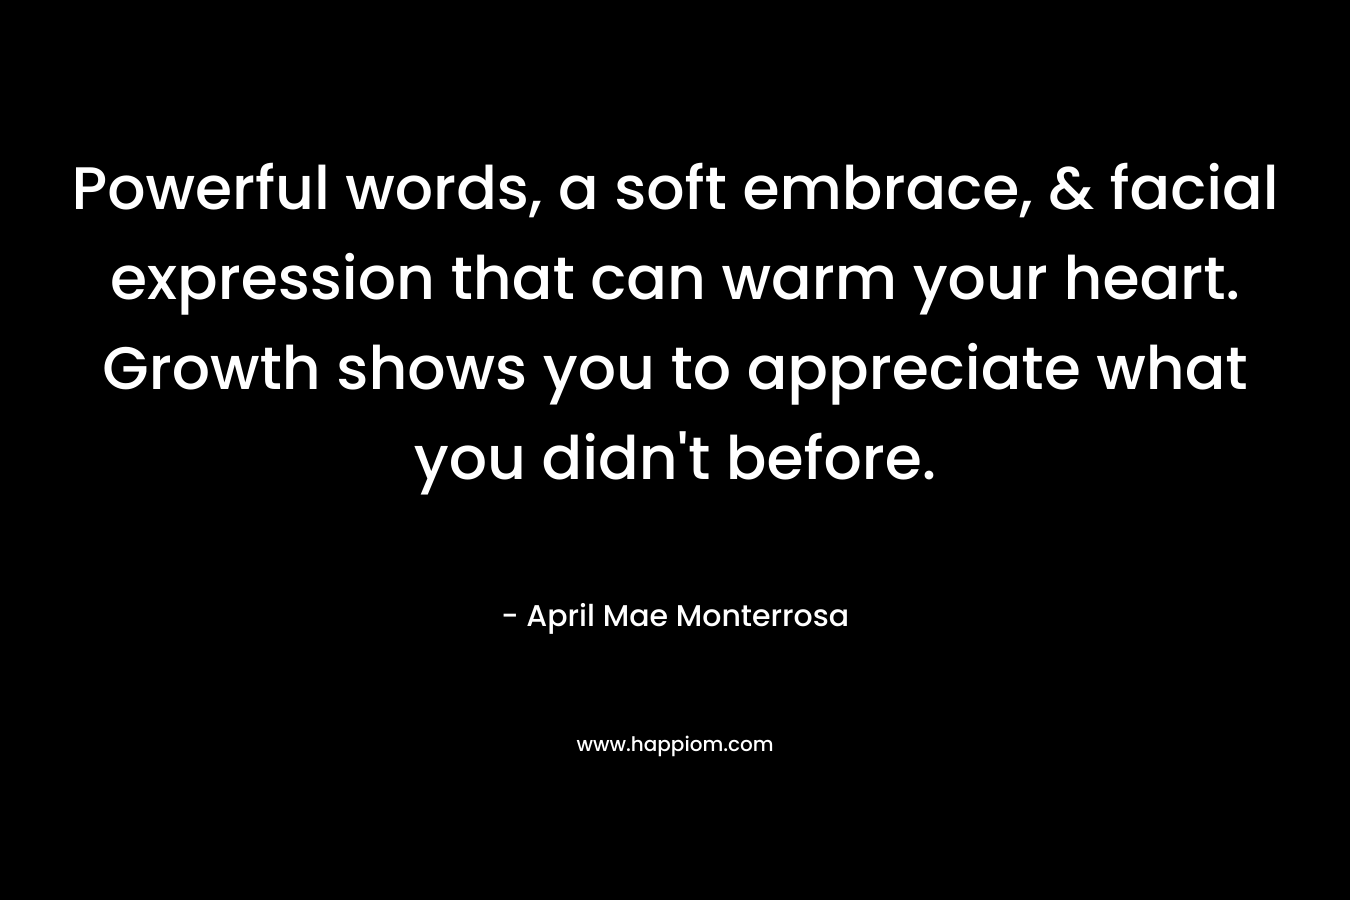 Powerful words, a soft embrace, & facial expression that can warm your heart. Growth shows you to appreciate what you didn't before.